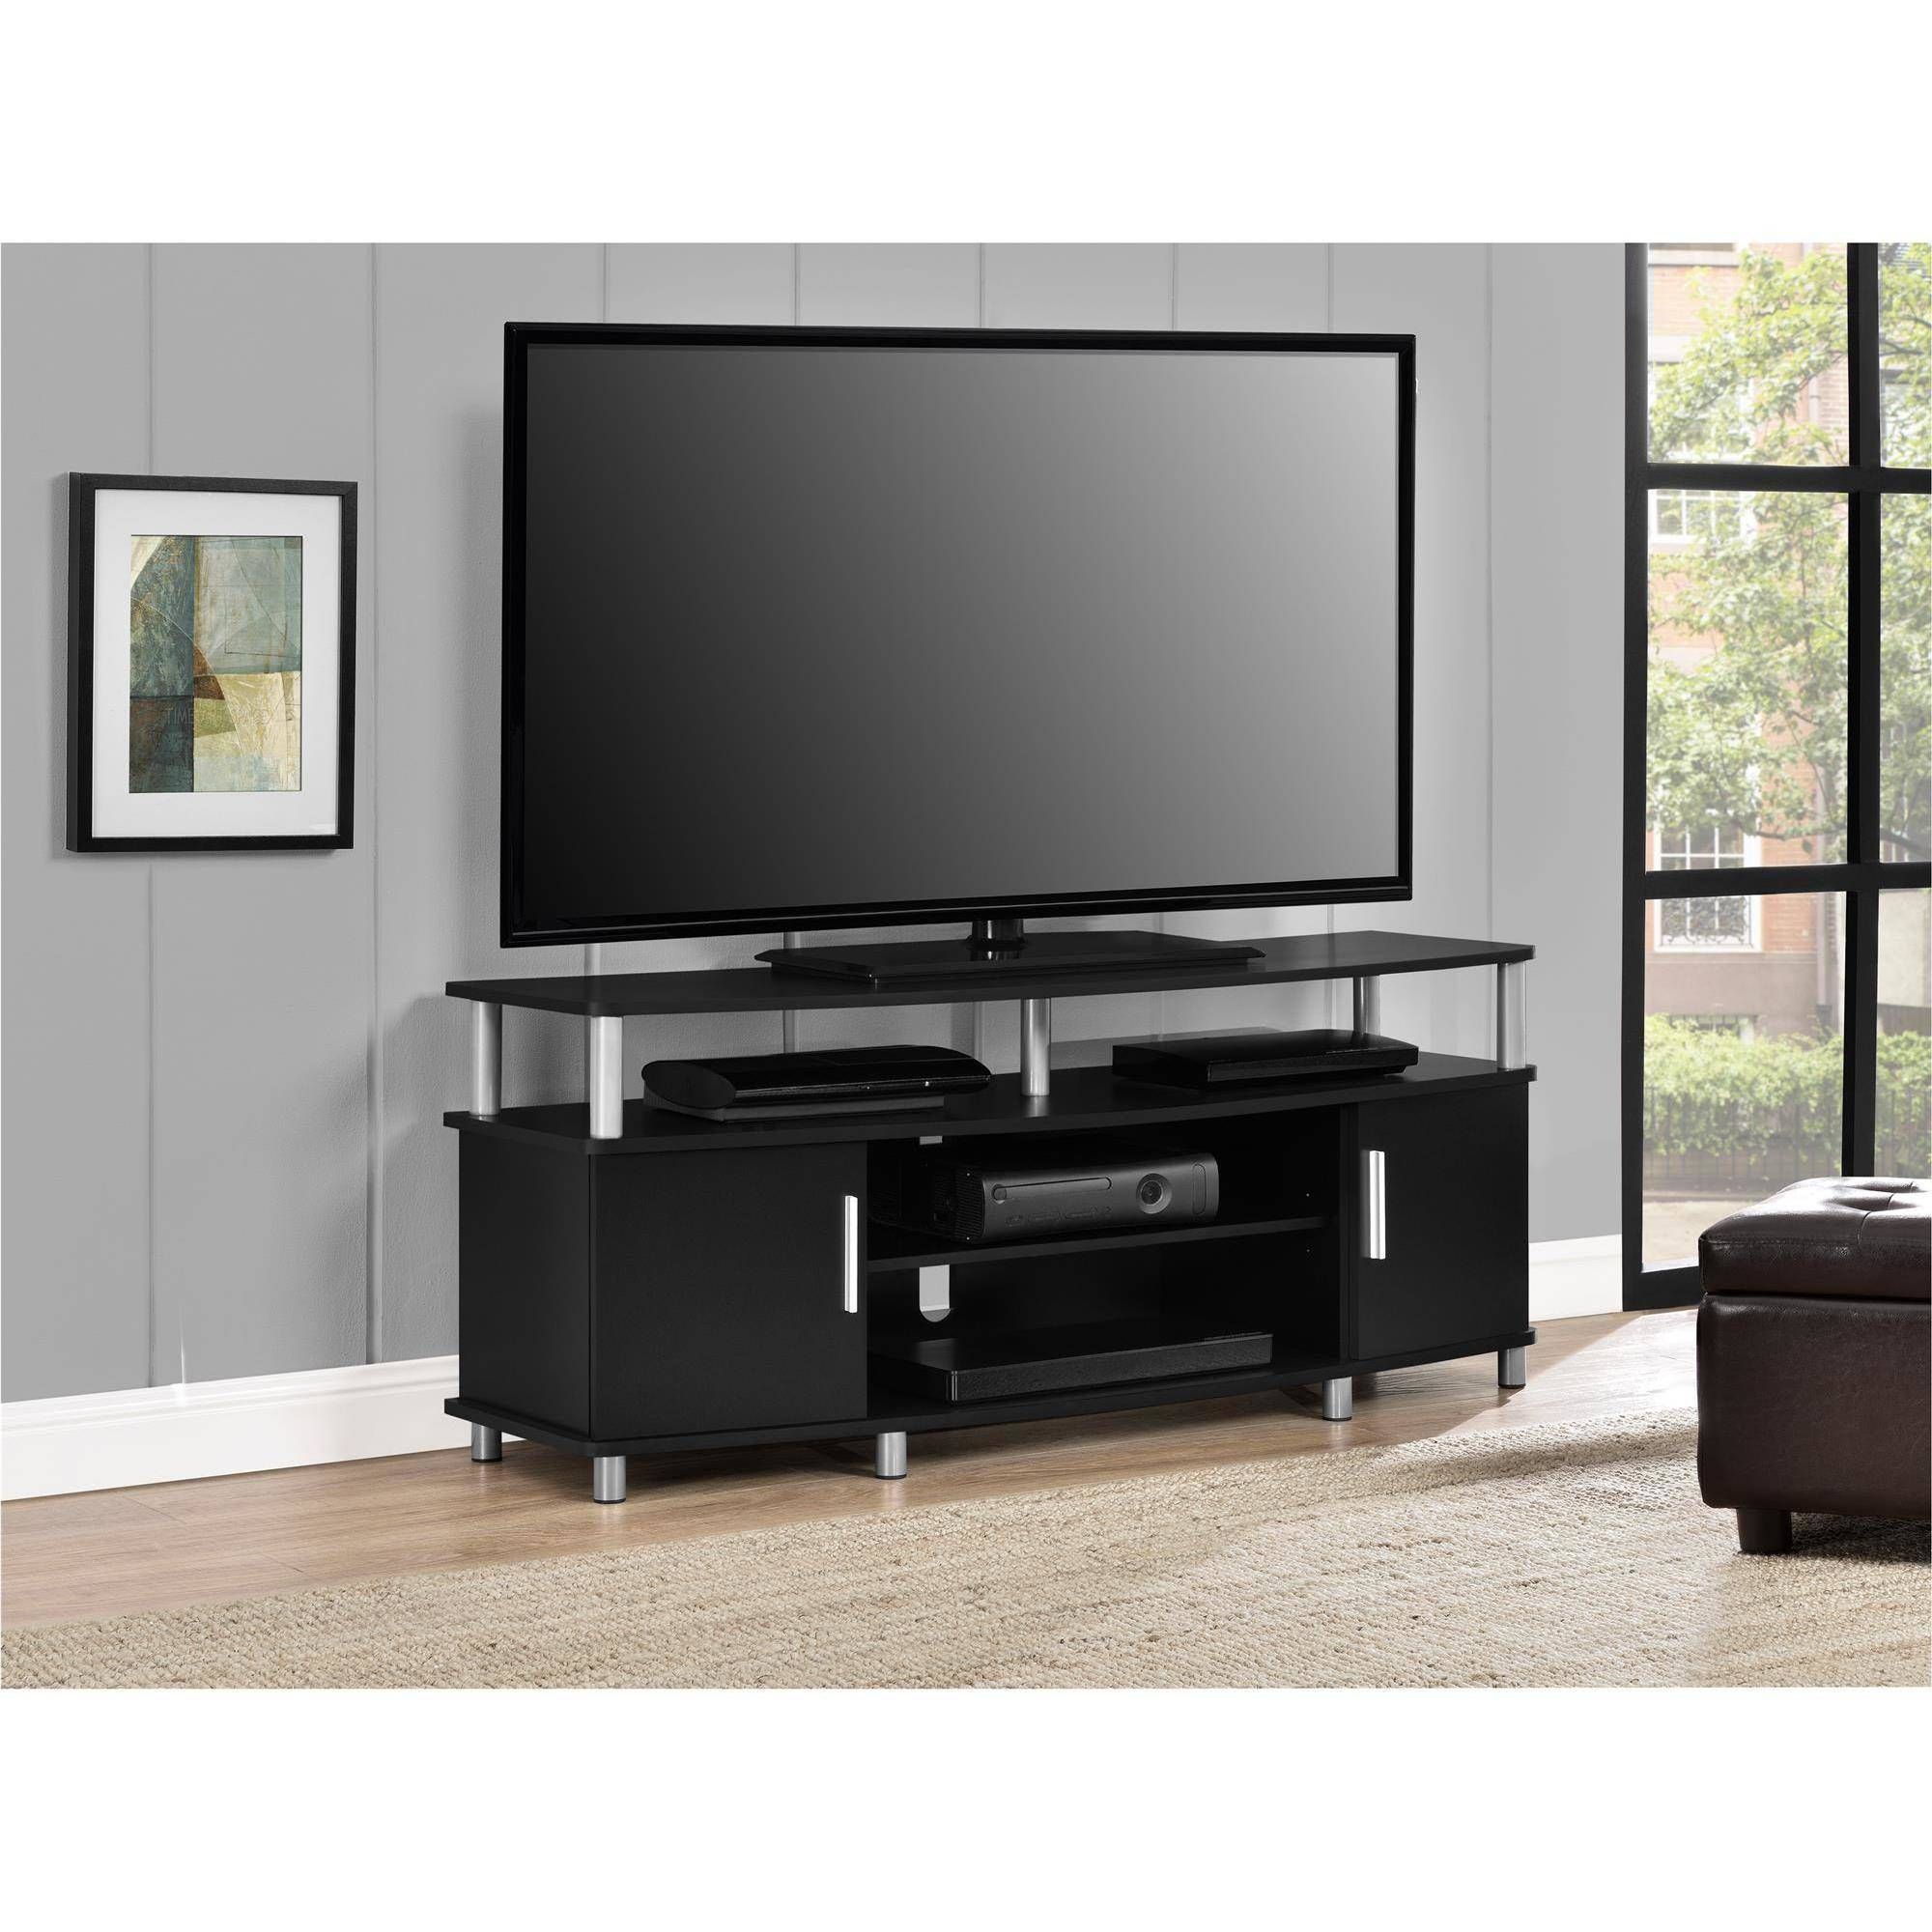 Carson Tv Stand For Tvs Up To 50" Wide, Black – Walmart For Oliver Wide Tv Stands (View 4 of 15)